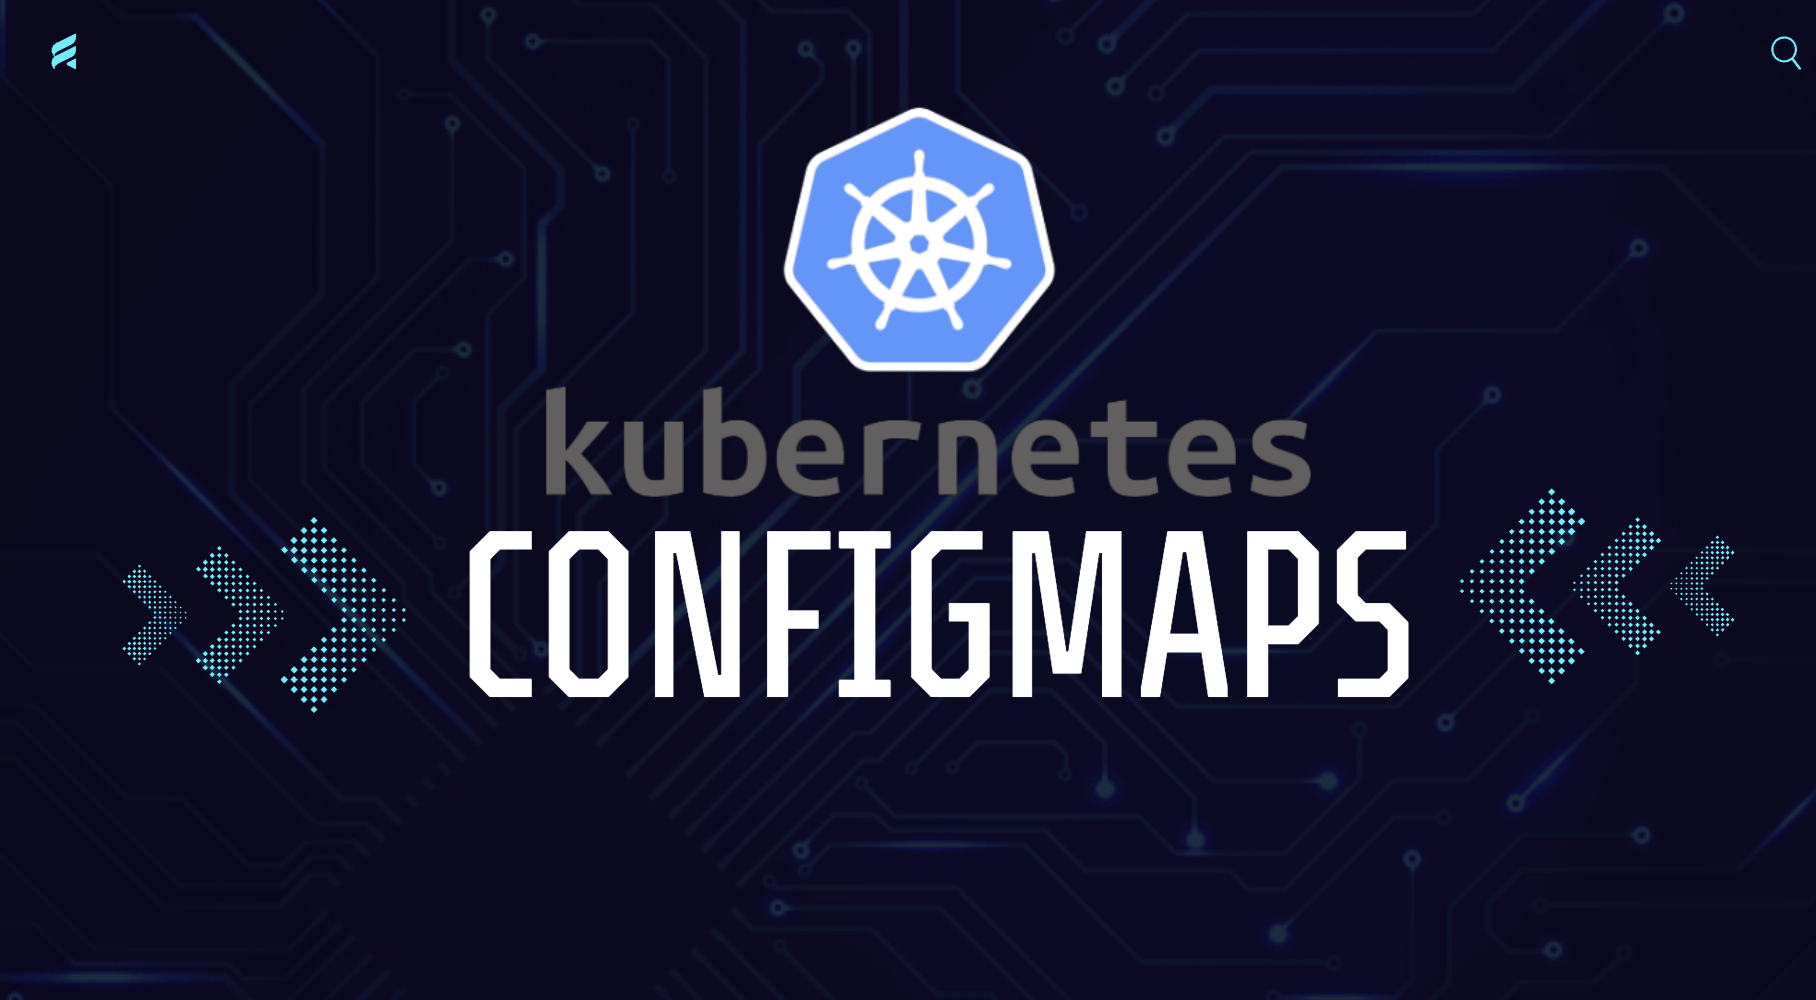 What is Kubernetes ConfigMap and what problem does it solve?